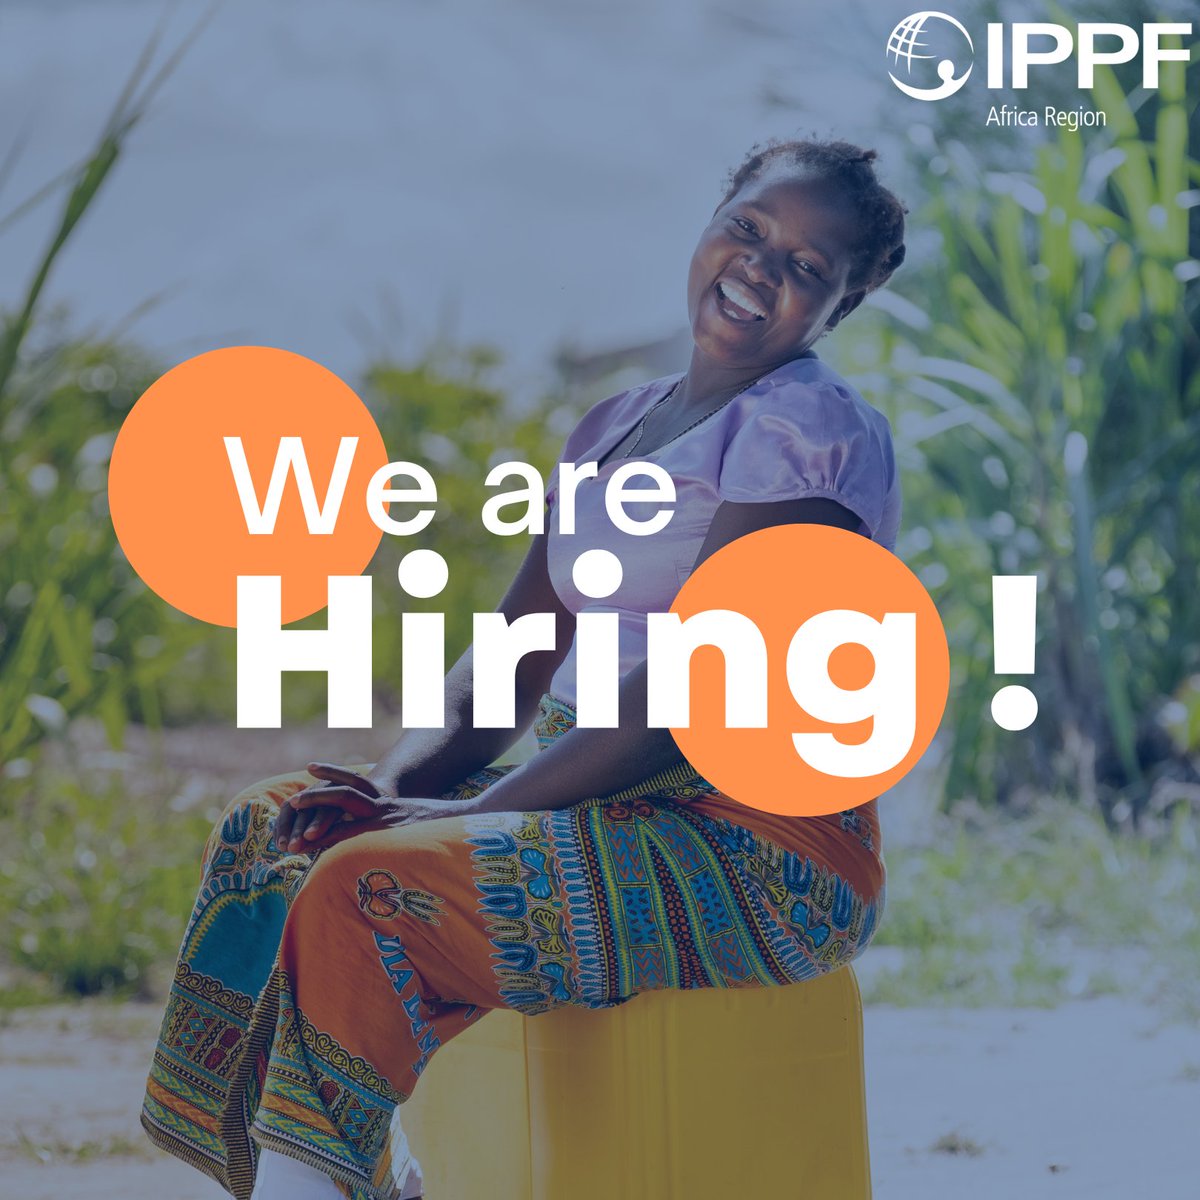 🌍 Join us in transforming reproductive care! IPPF Africa seeks a Project Manager for Francophone West Africa to empower #women with person-centered abortion care and advocate for equitable access. 📆 Deadline: August 31, 2023 ✅ Apply ➡️ bit.pulse.ly/s79g1yawoi @yamafrica